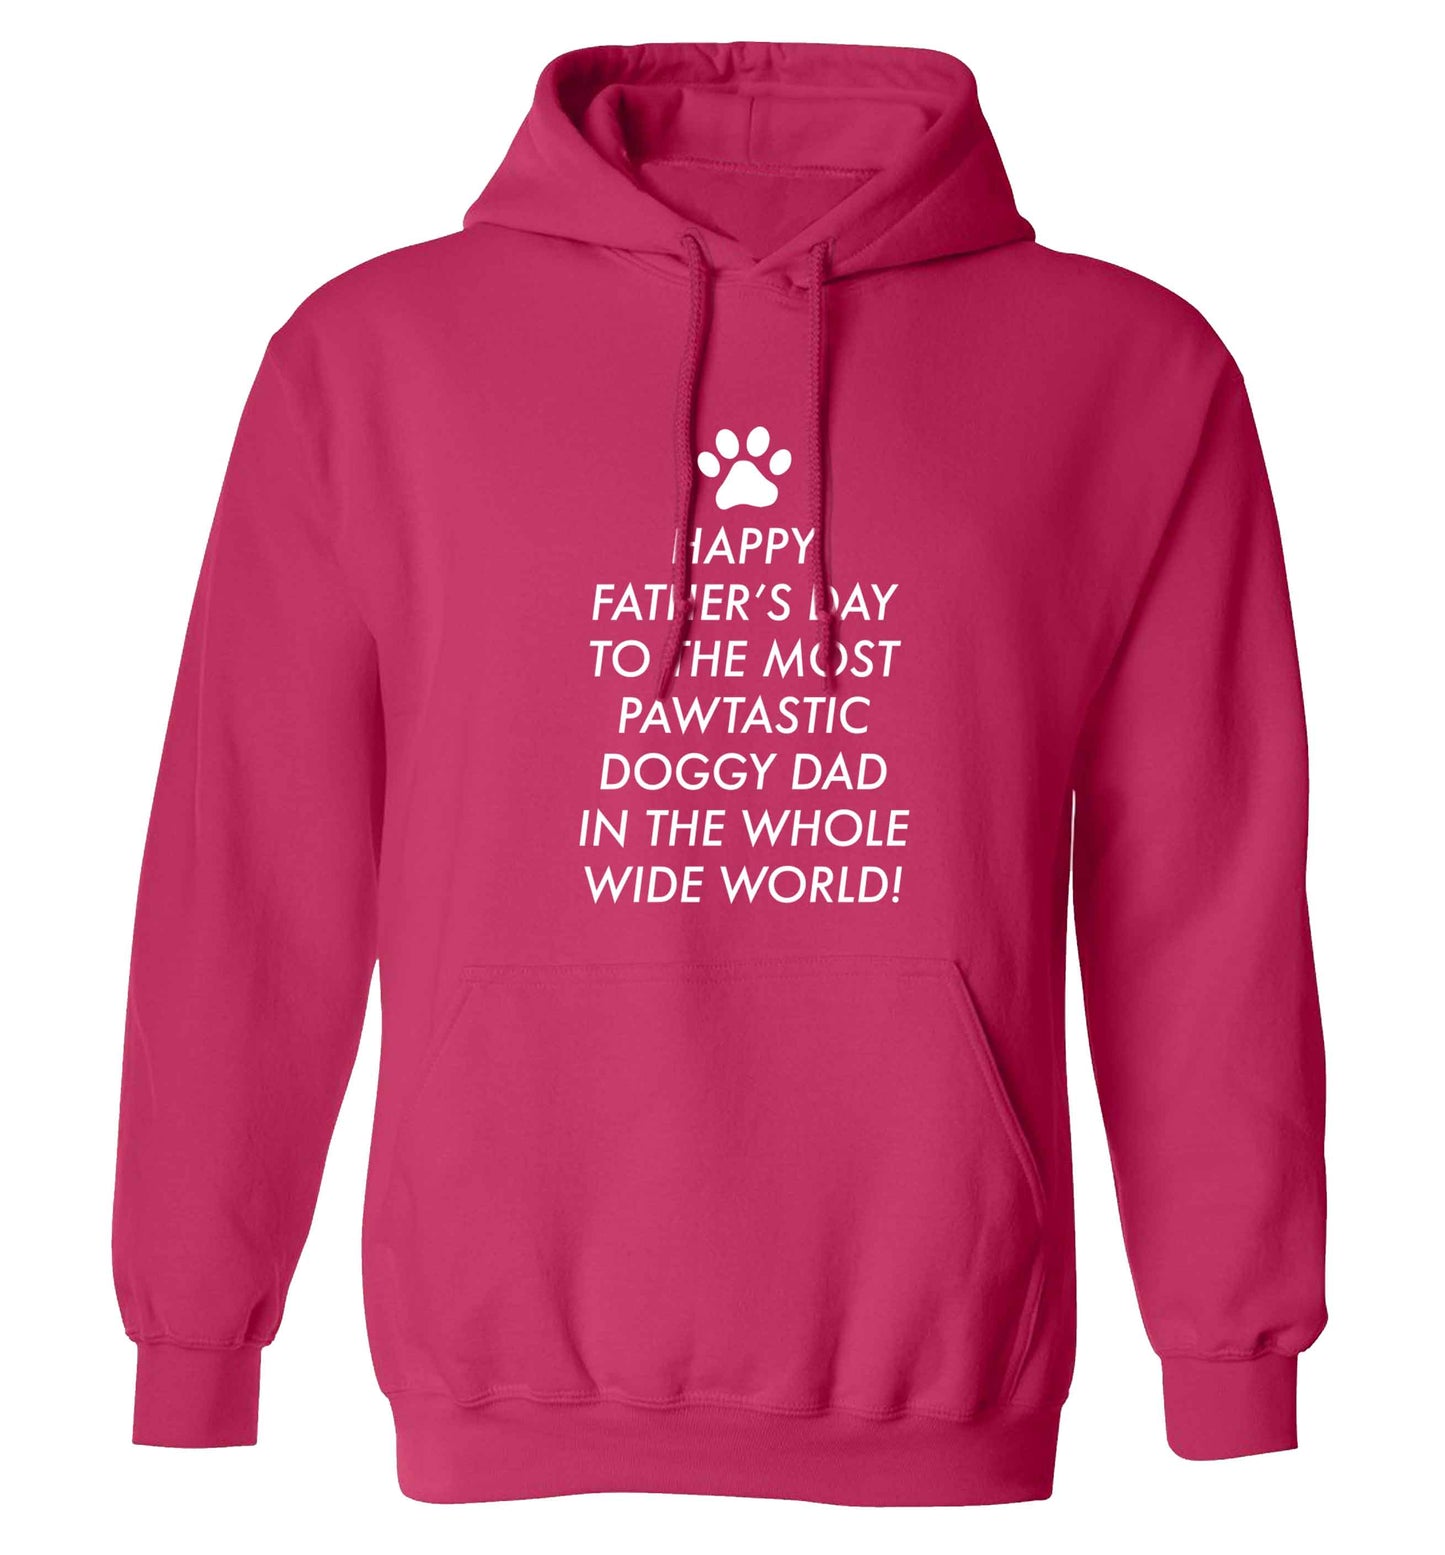 Happy Father's day to the most pawtastic doggy dad in the whole wide world!adults unisex pink hoodie 2XL